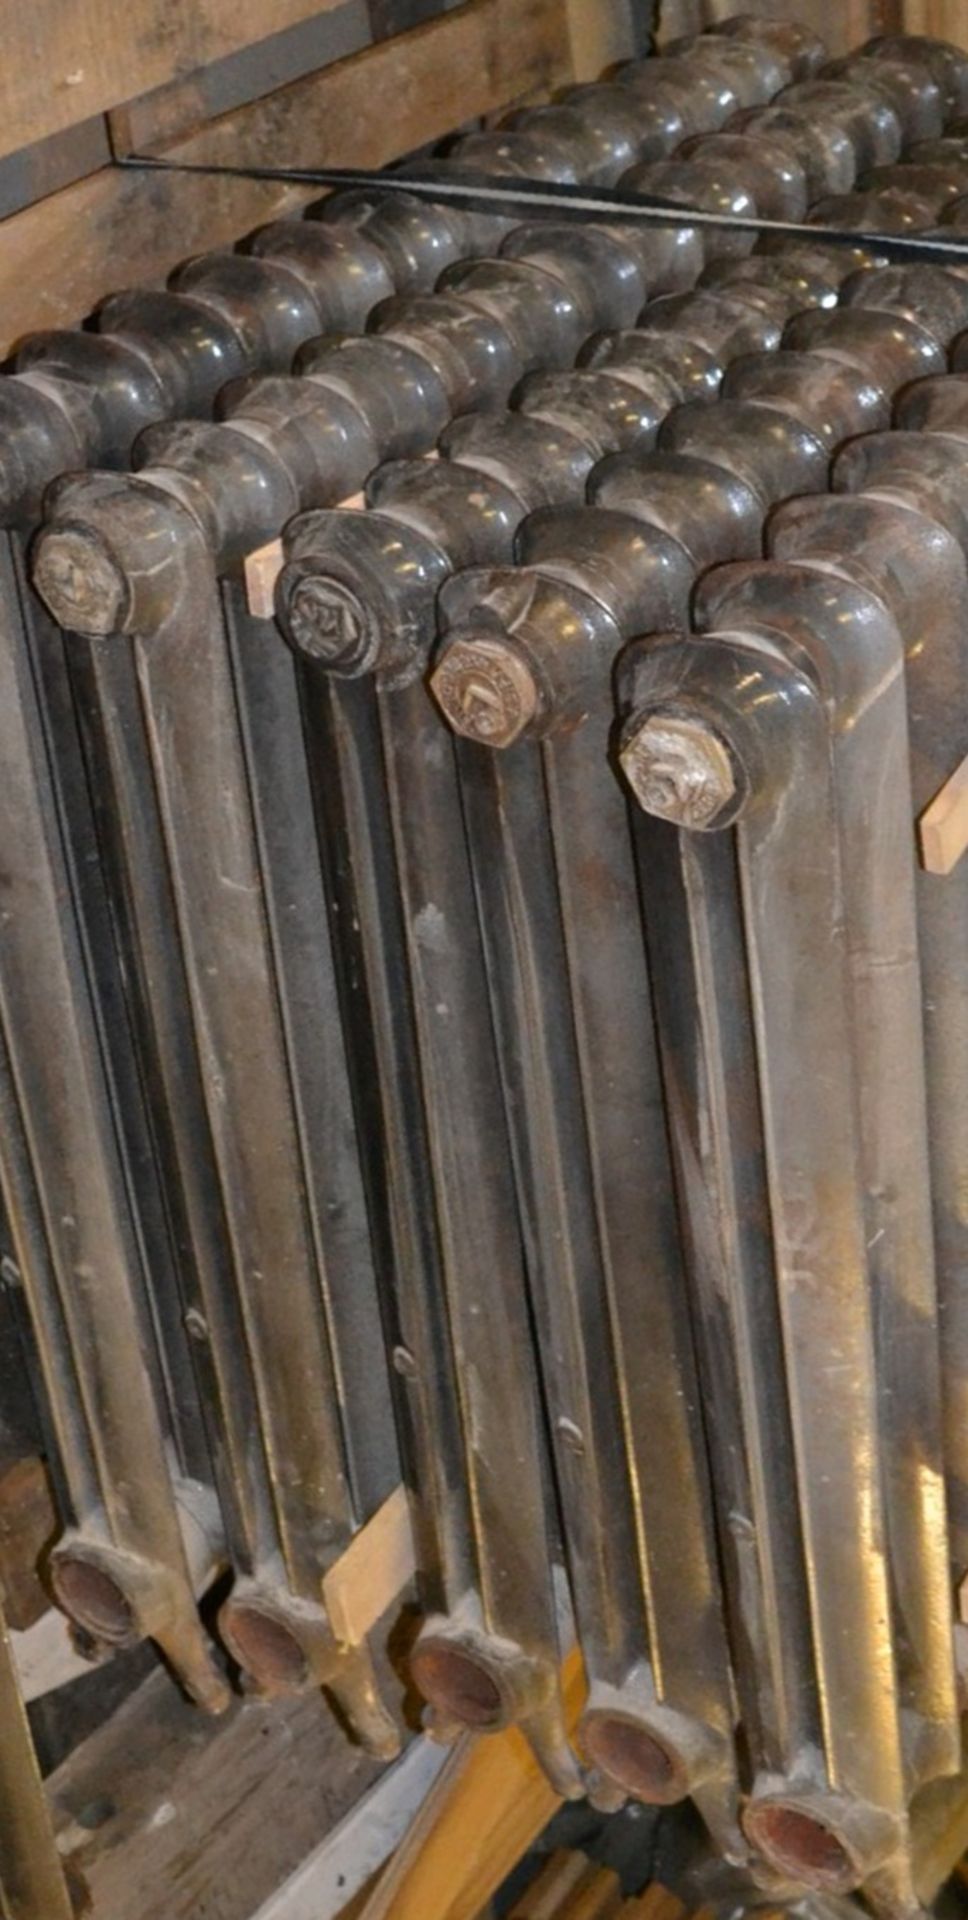 1 x Vintage Traditional Cast Iron 9-Section Radiator - Dimensions: W70 x H95cm - Ref: HM264/9sec - Image 6 of 6